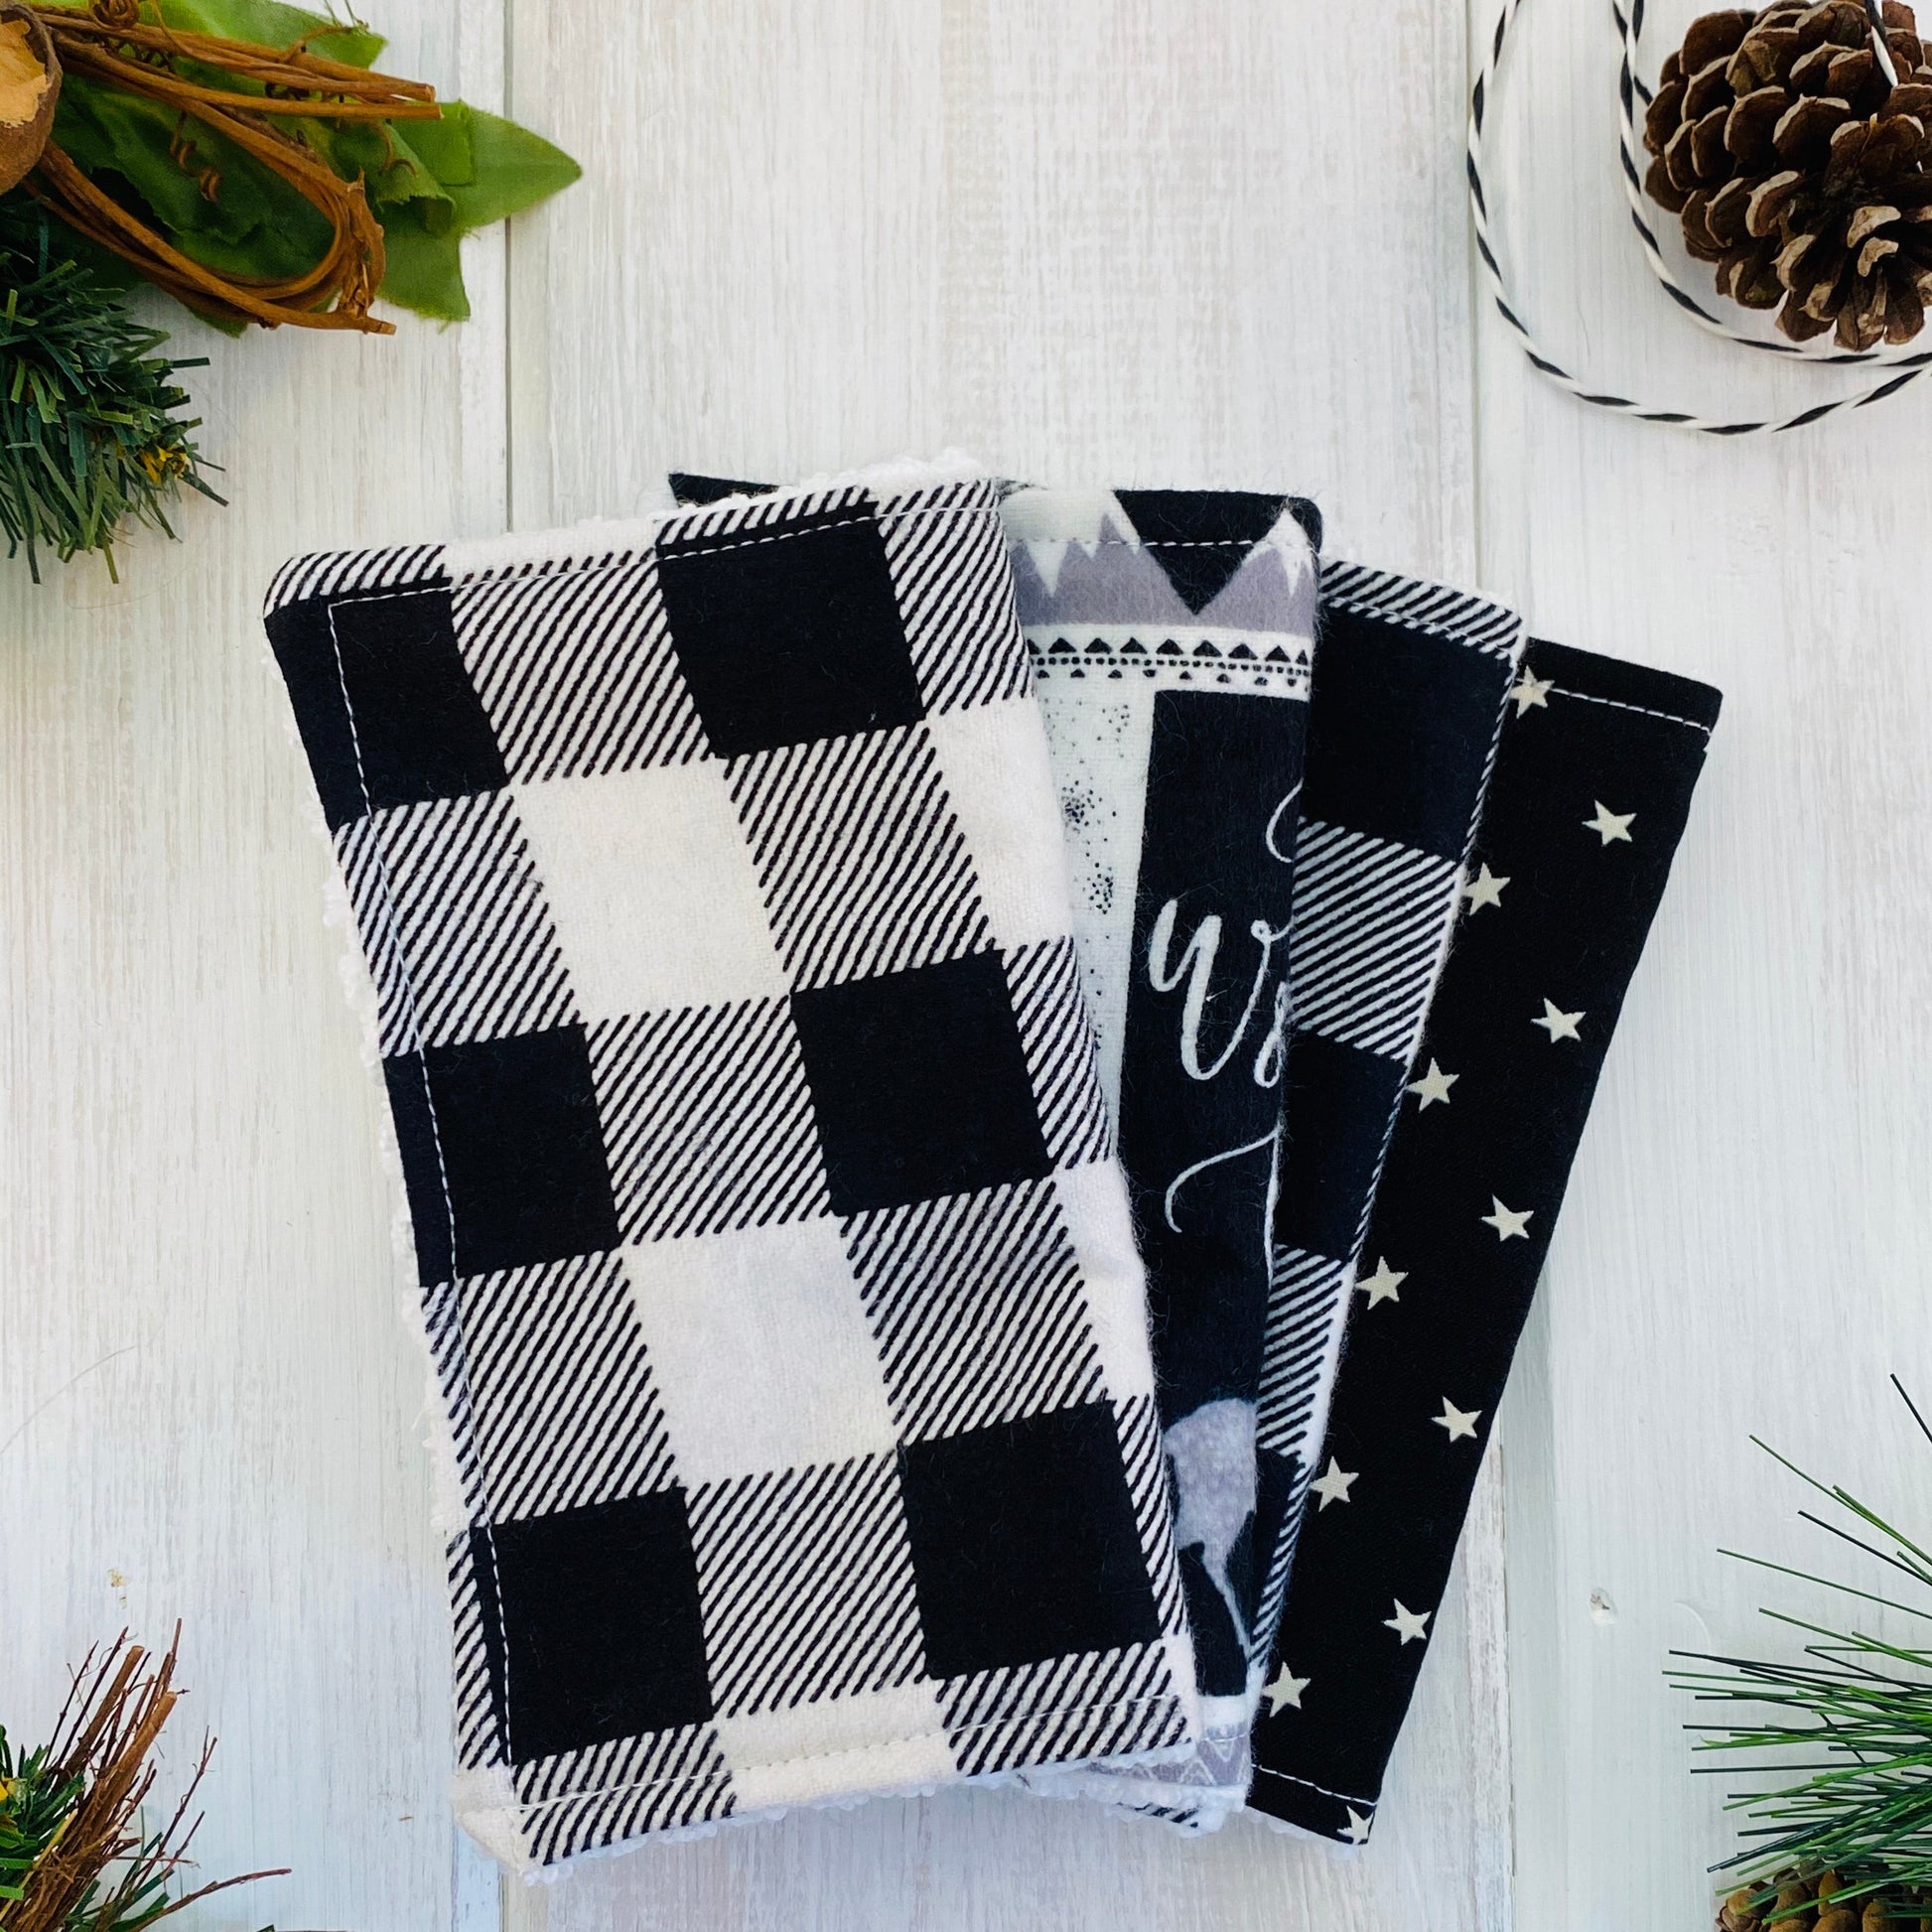 Set of 4 baby washing cloths, sustainable, reusable. Shown in classic black and white buffalo check.